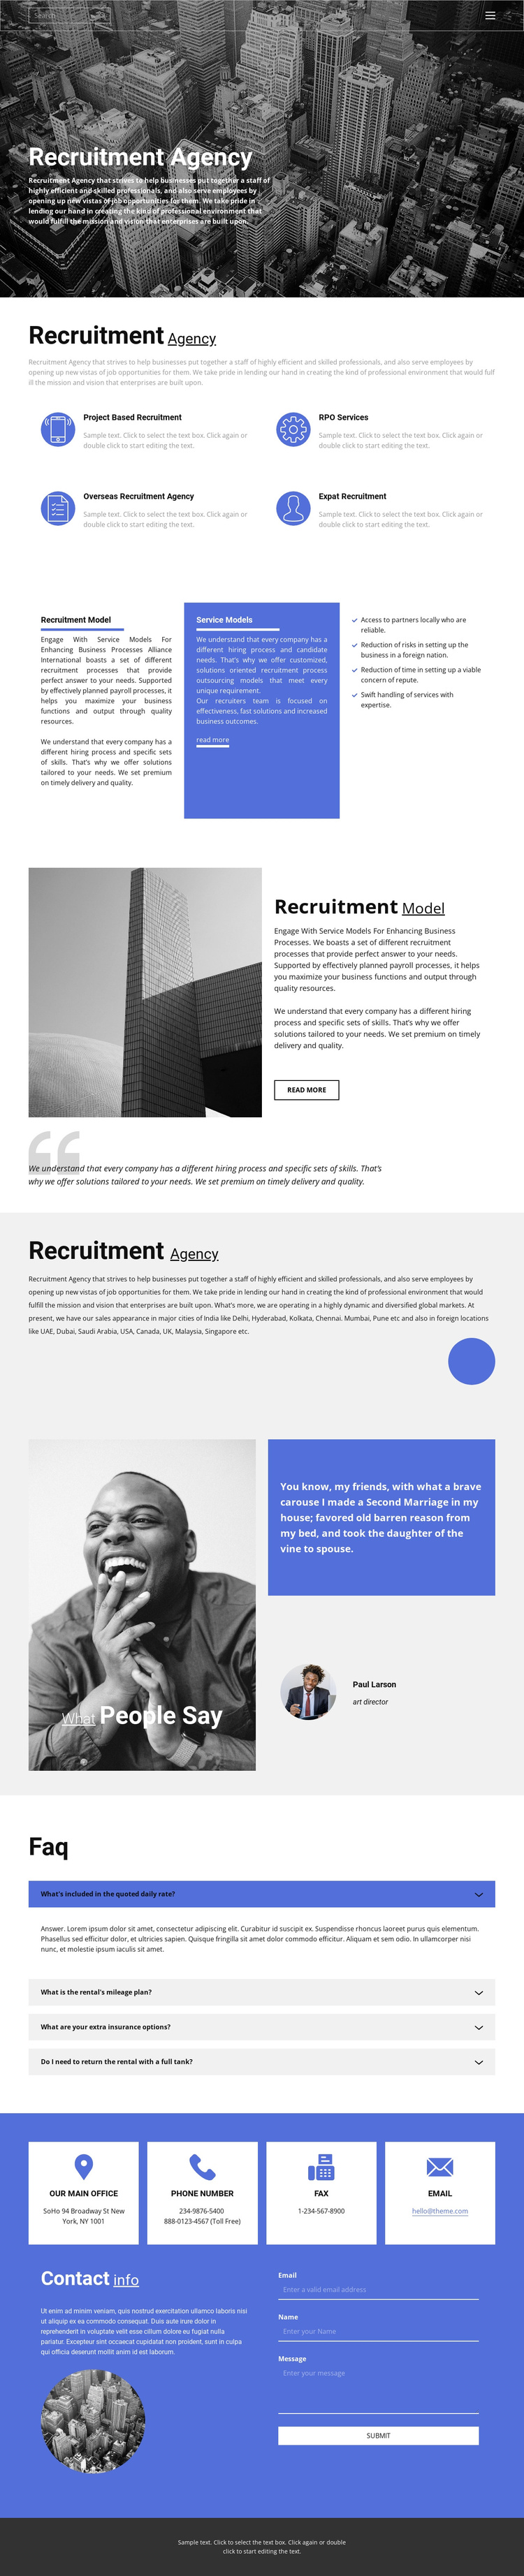 Recruiting agency with good experience Joomla Template